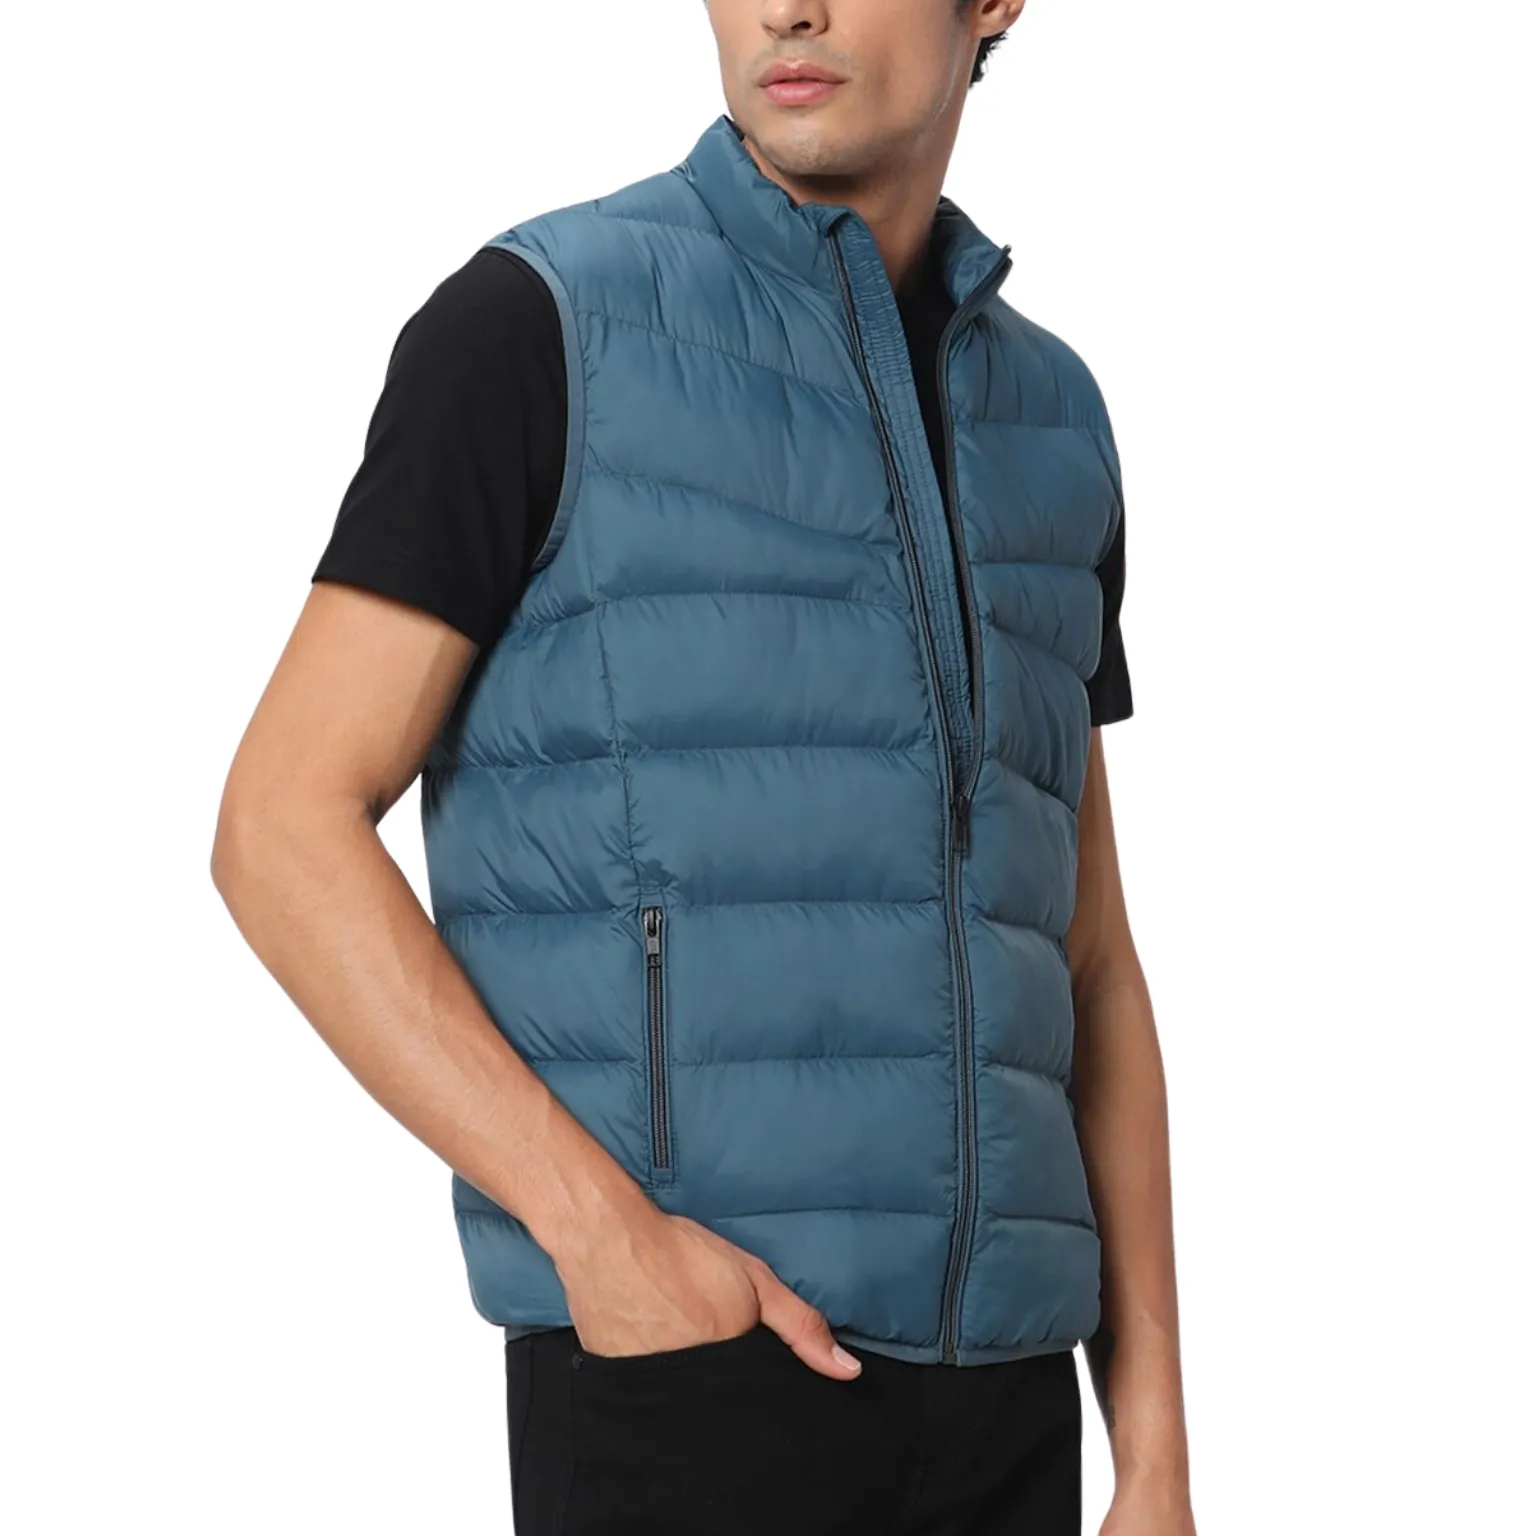 Gilet Jacket Manufacturing with superior quality